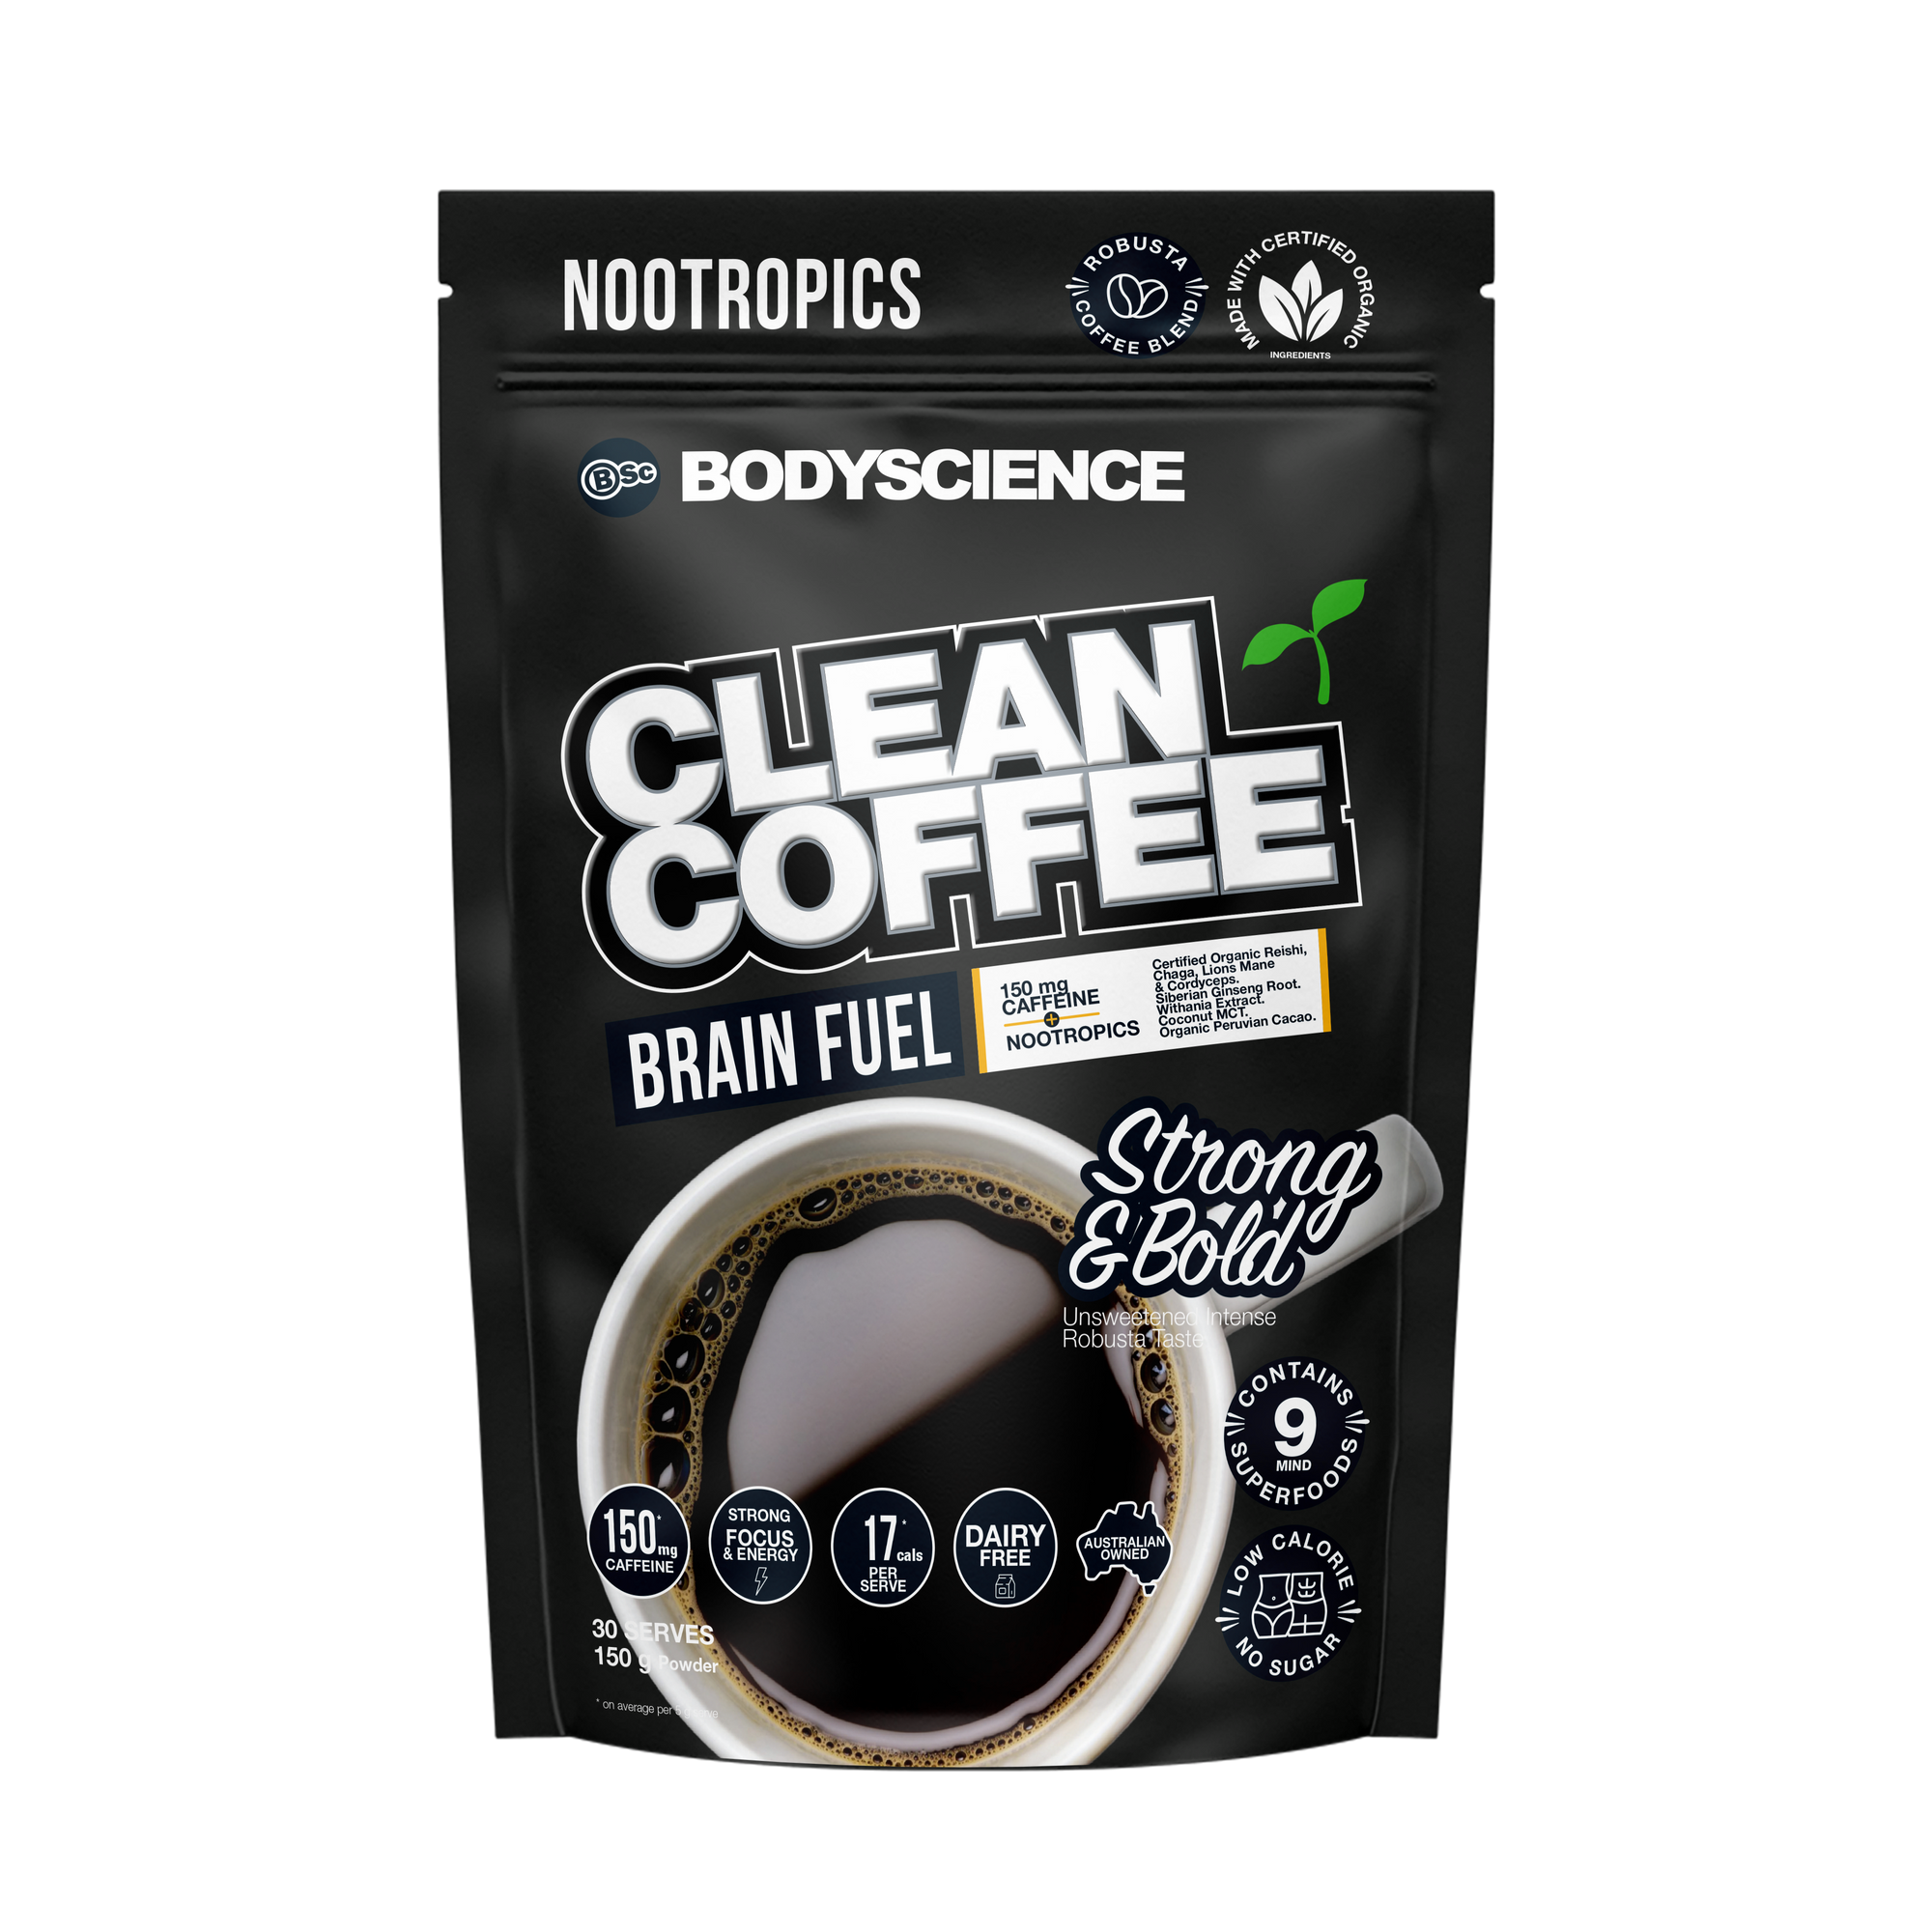 Fitness Hero presents Body Science BSc Clean Coffee - Brain Fuel. A superior coffee blend containing Australian blended Robusta Coffee and 9 mind superfoods.